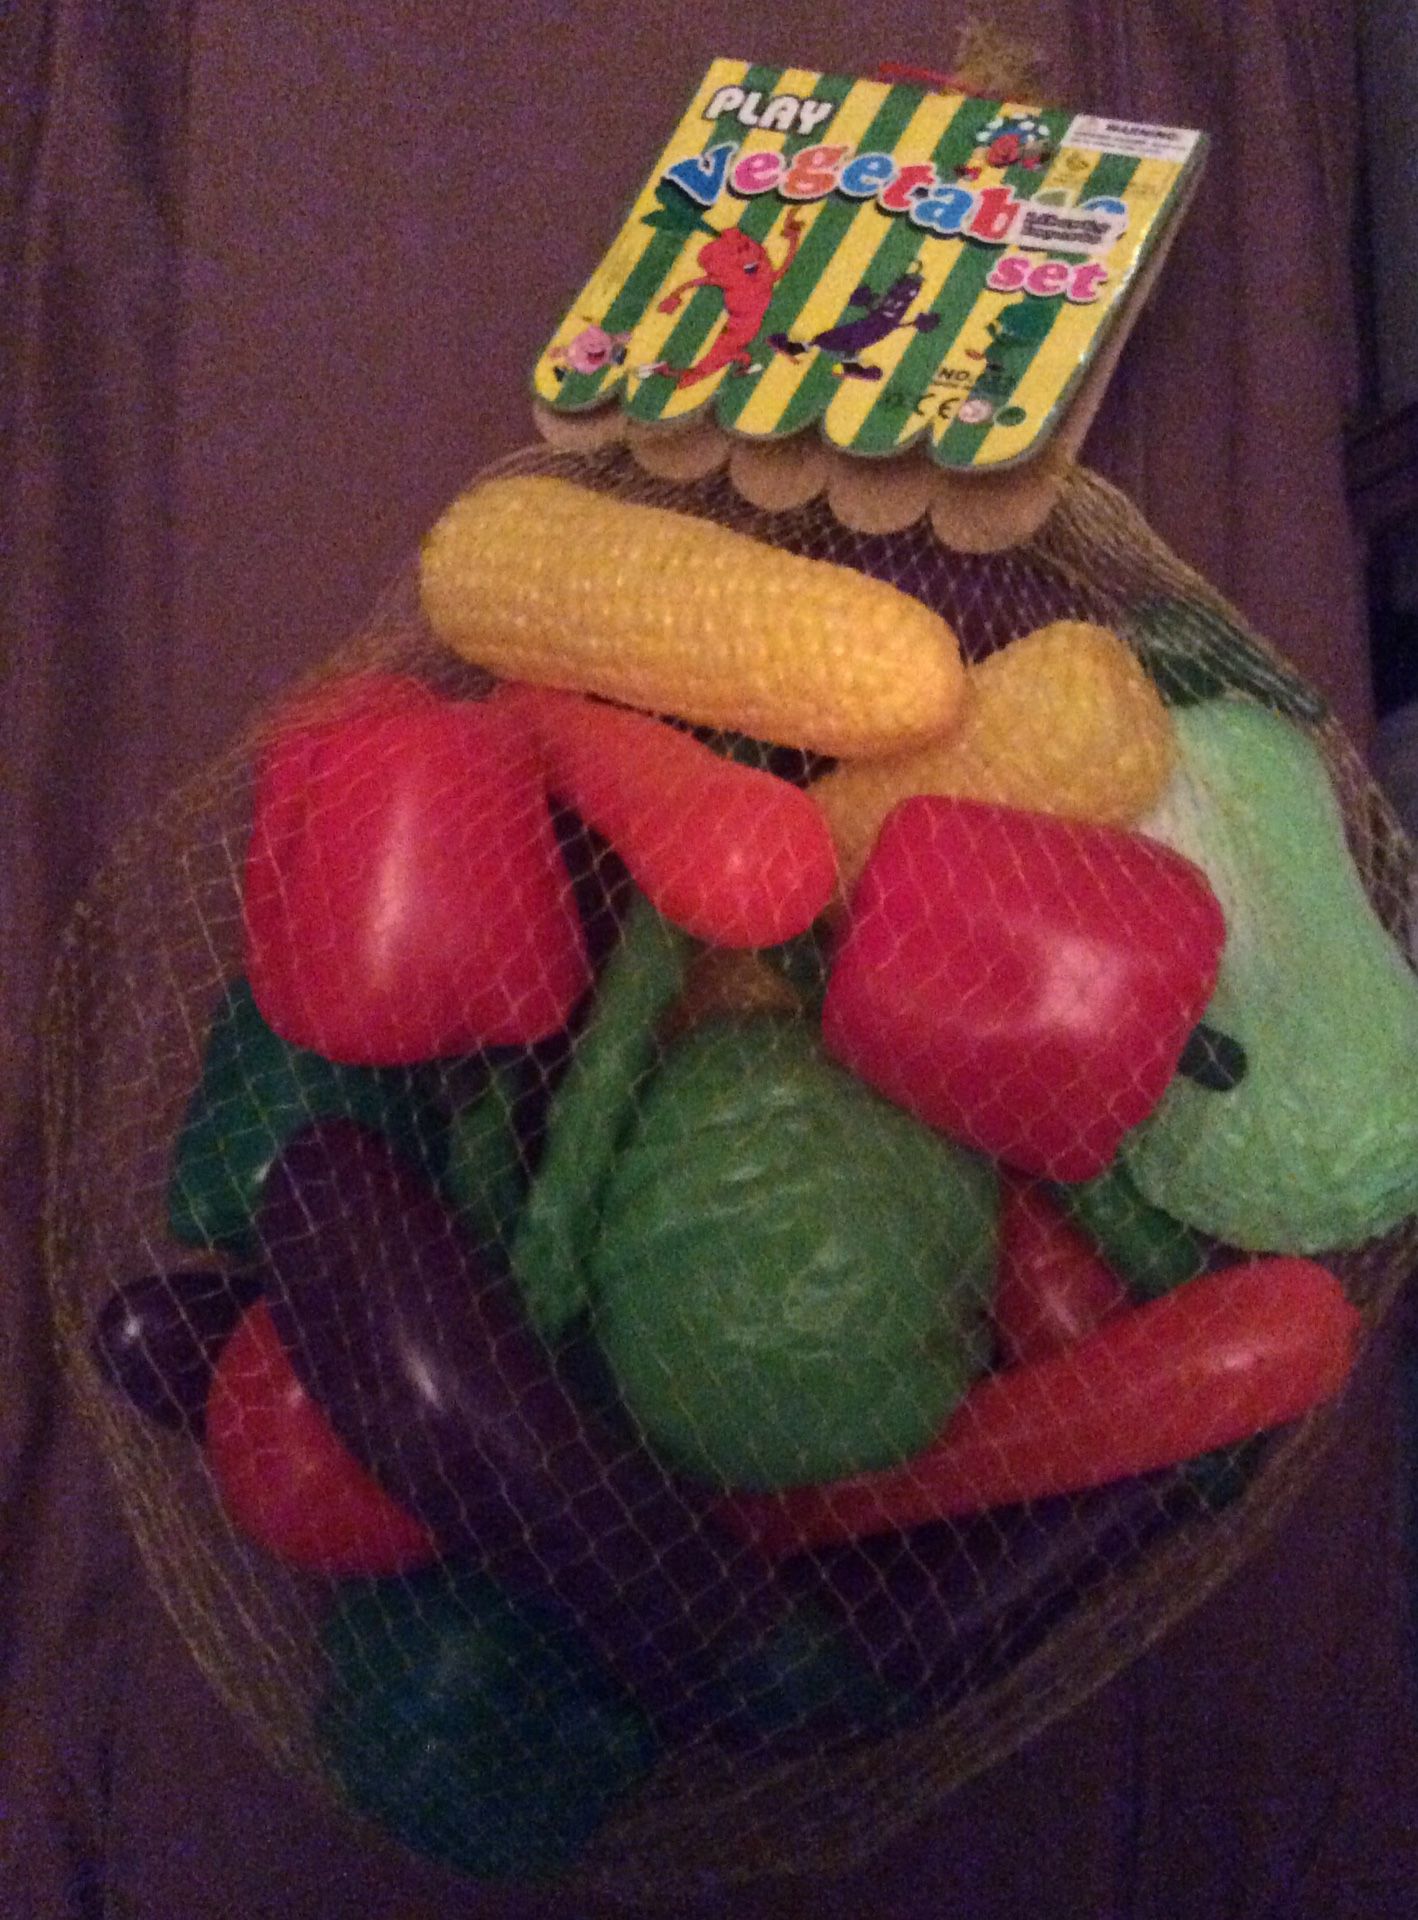 New bag of plastic play vegetables